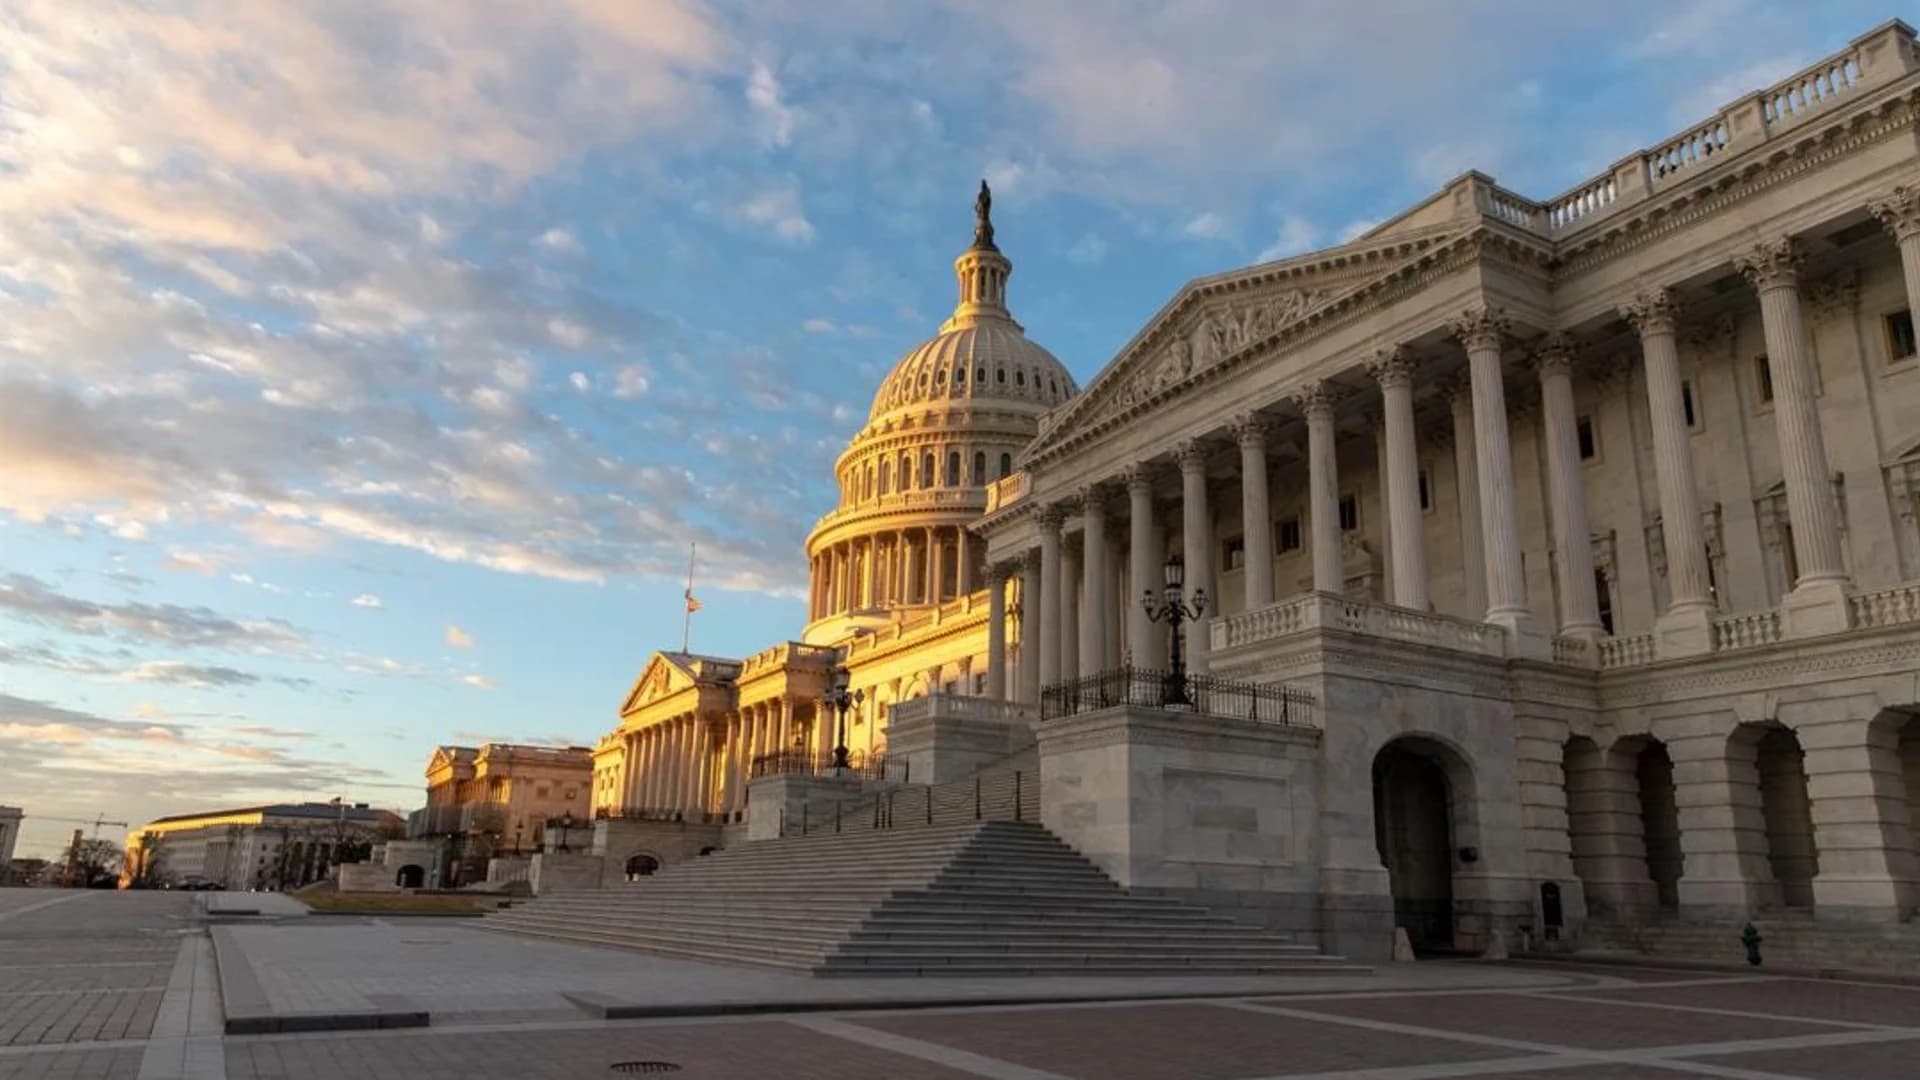 What's affected by the partial government shutdown?